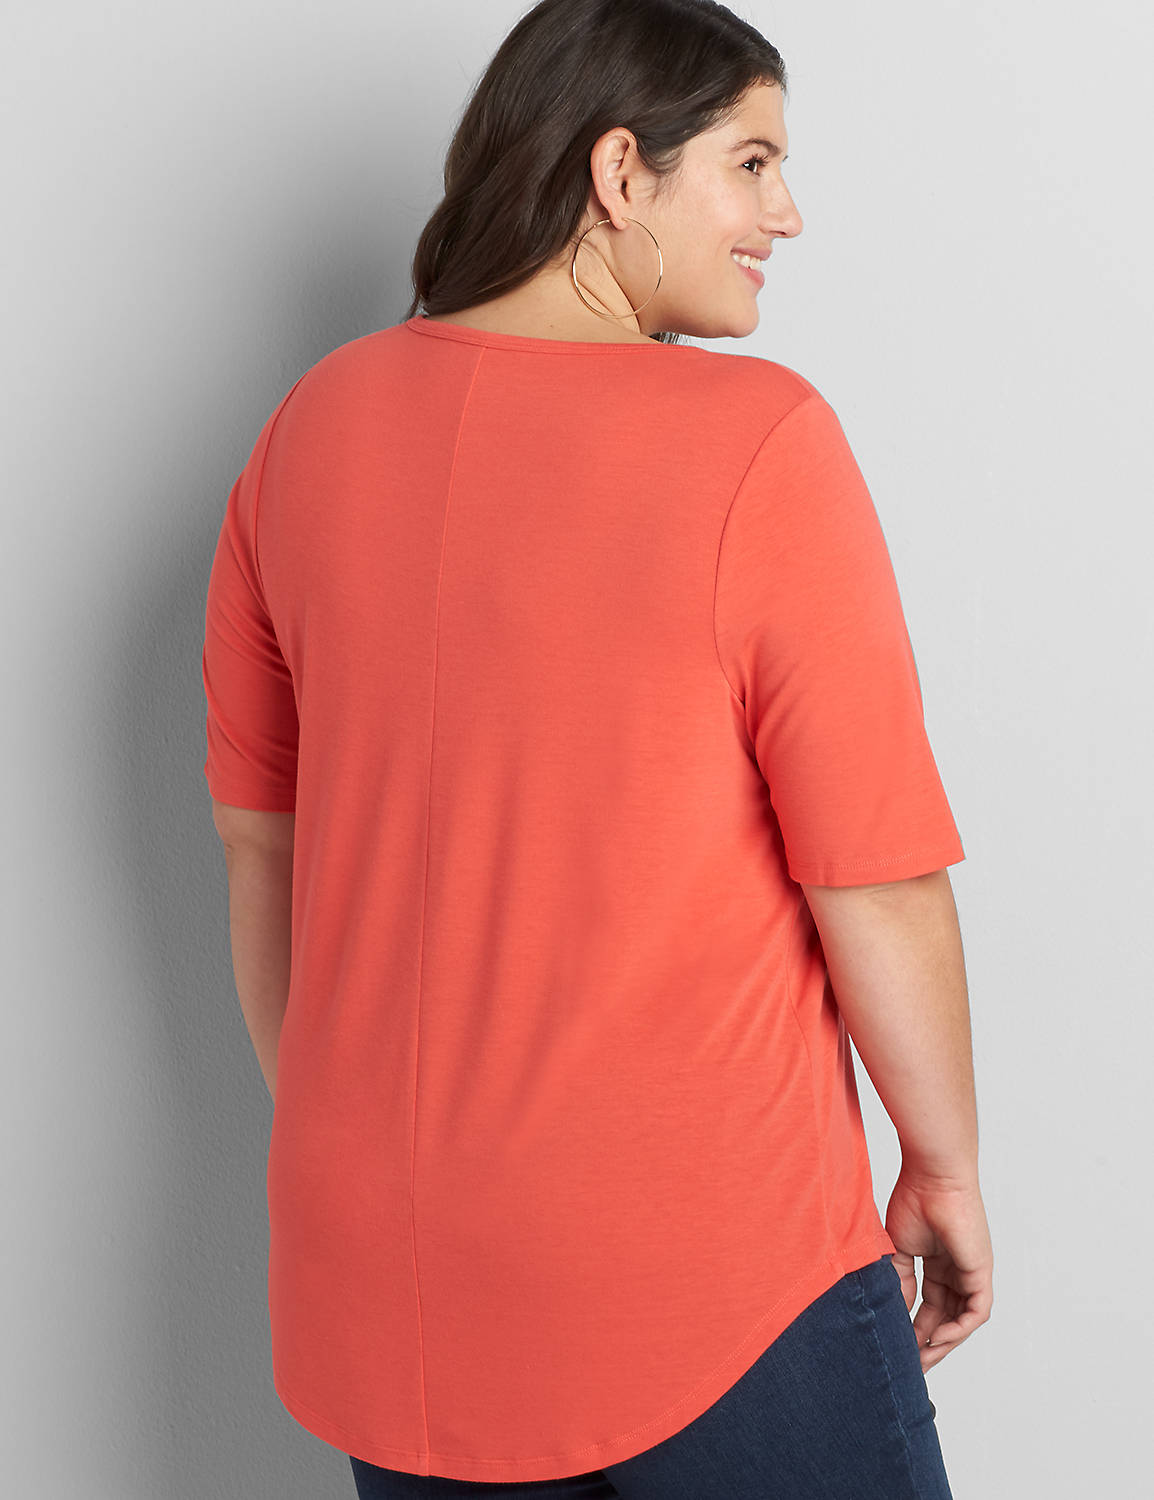 Perfect Sleeve Open Crew Neck Curved Hem Tee 1118446:Starfish Coral CSI 0301184:26/28 Product Image 2